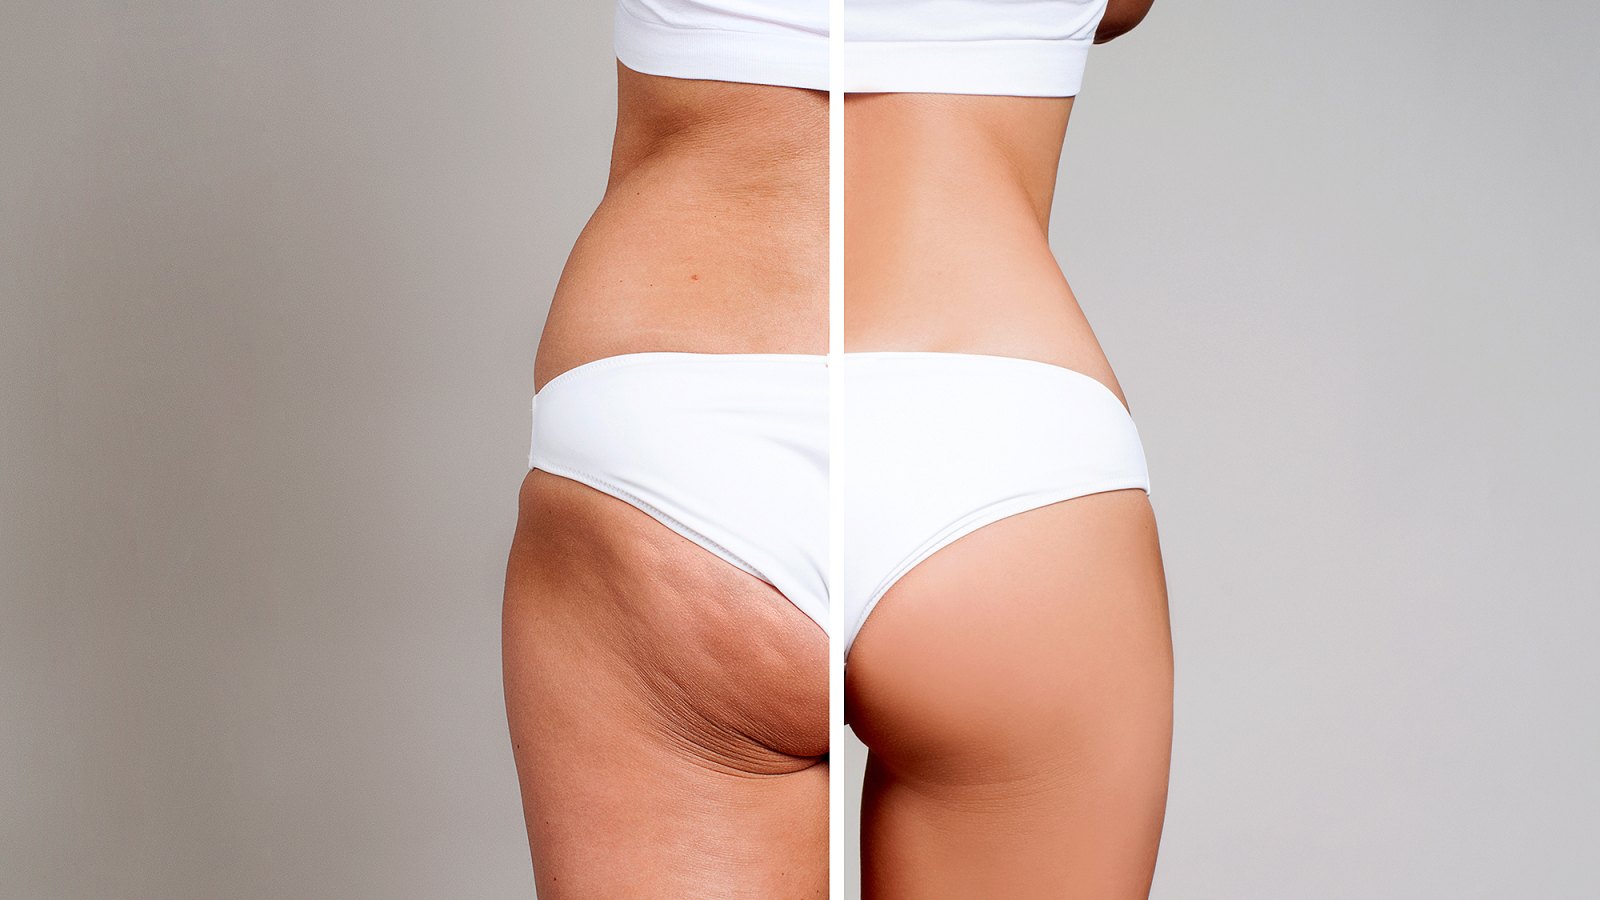 One simple anti-cellulite treatment and the aftercare - RECOVA®